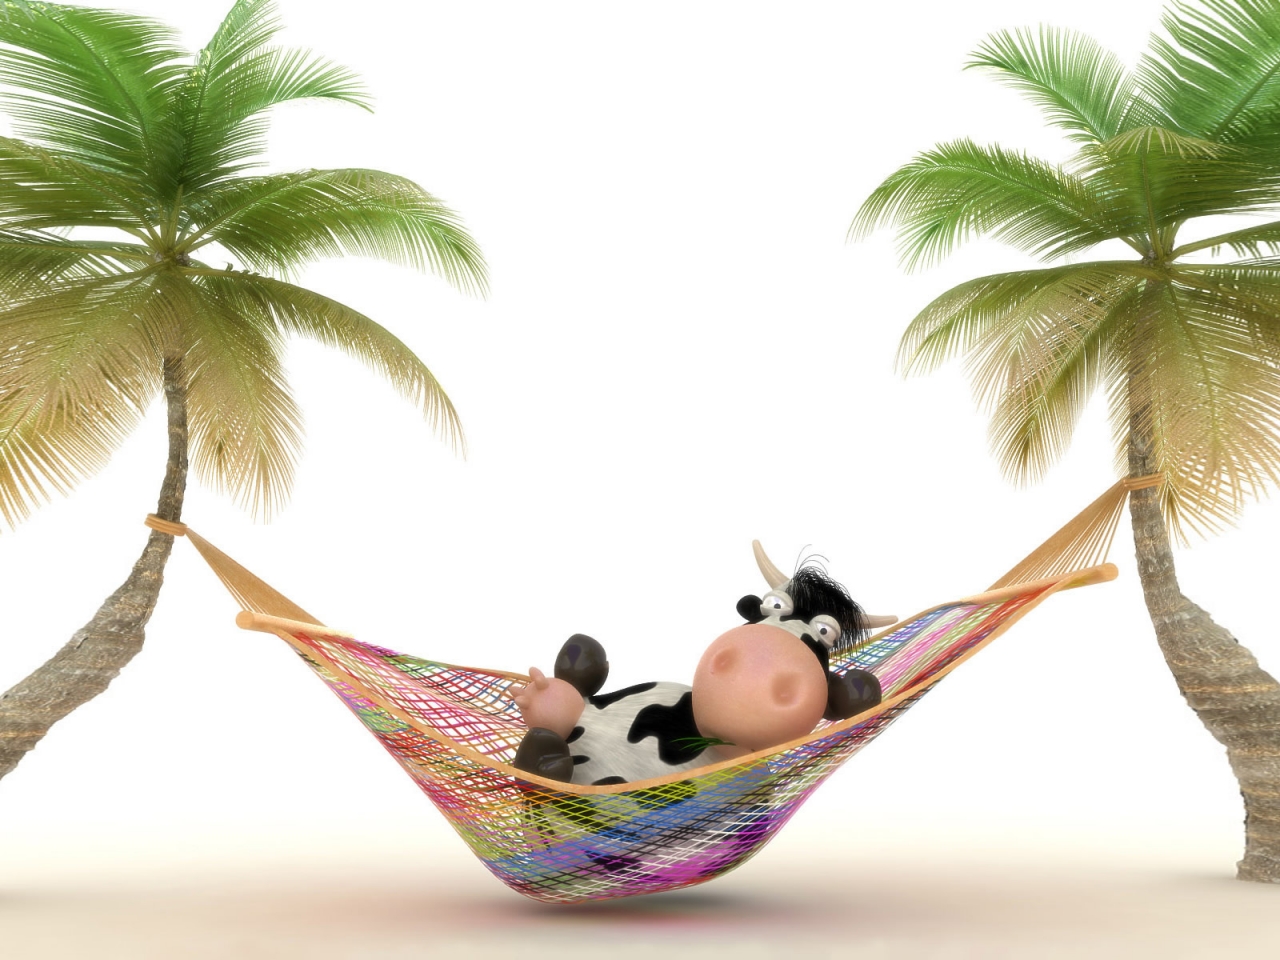 Cow relaxing in Hammock for 1280 x 960 resolution